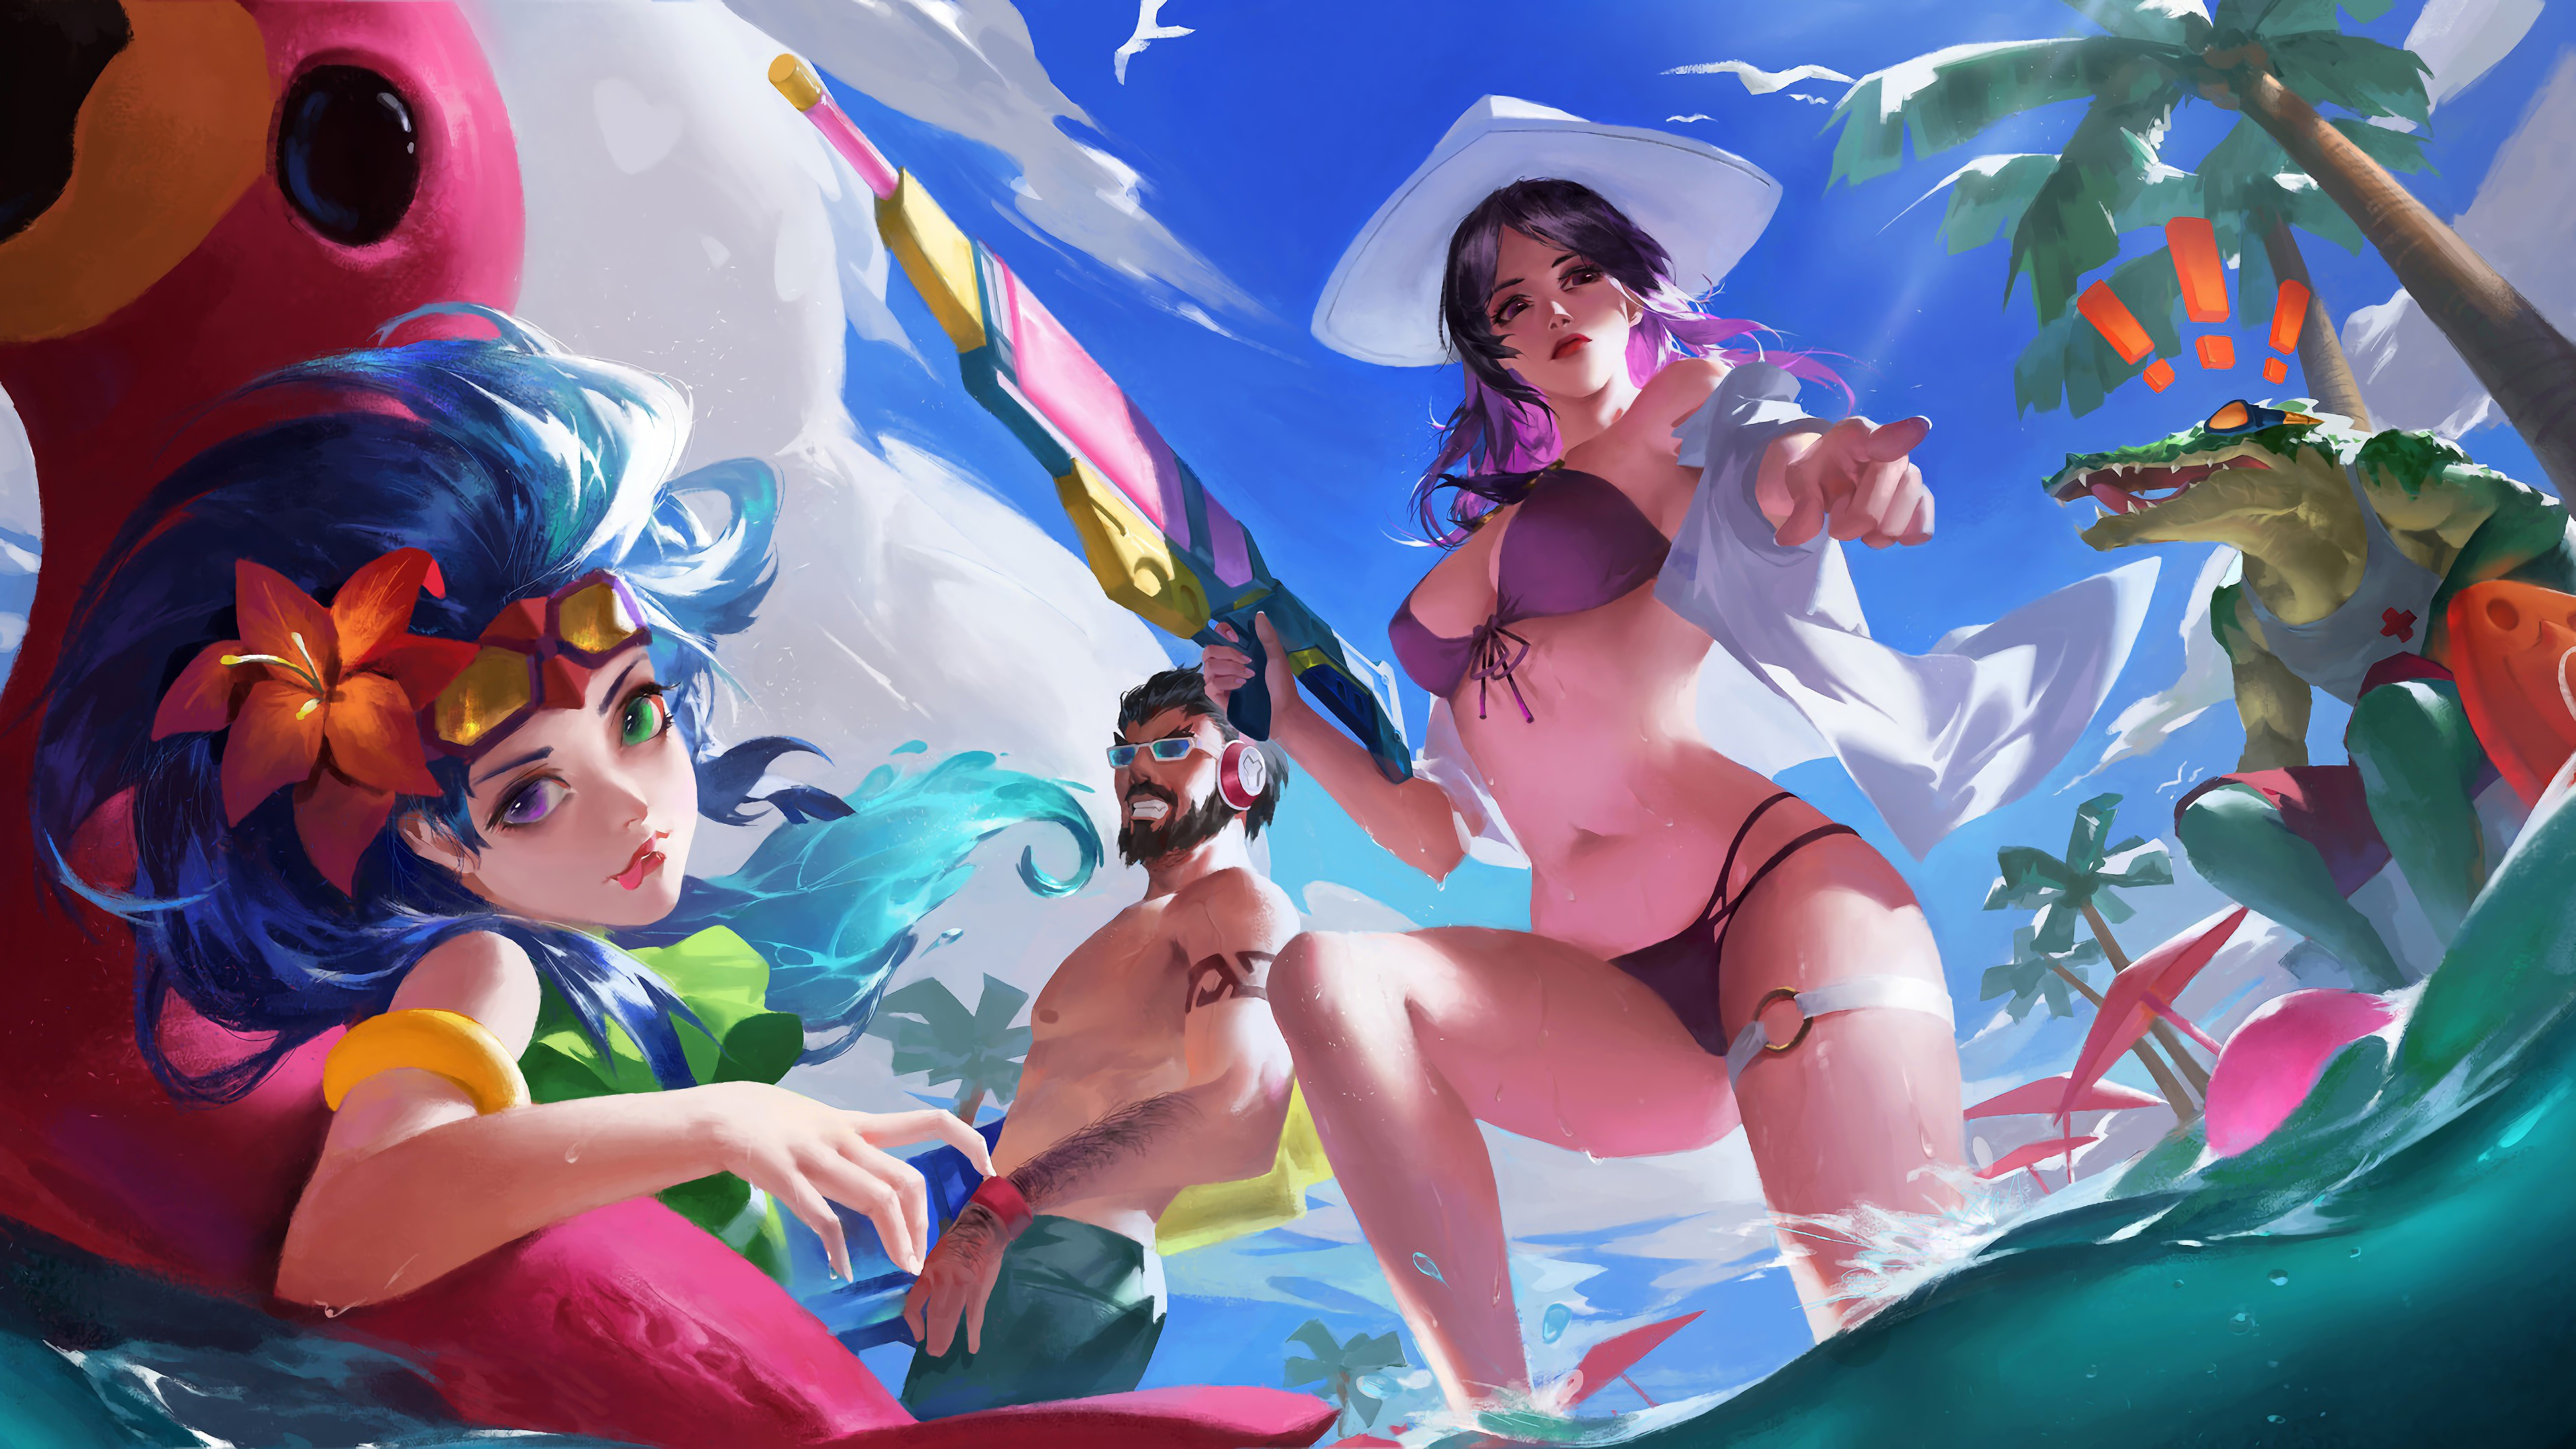 General 3840x2160 League of Legends video games Caitlyn (League of Legends) pool party Zoe (League of Legends) Renekton (League of Legends) finger pointing water guns palm trees flower in hair hat standing in water digital art floater Graves (League of Legends)